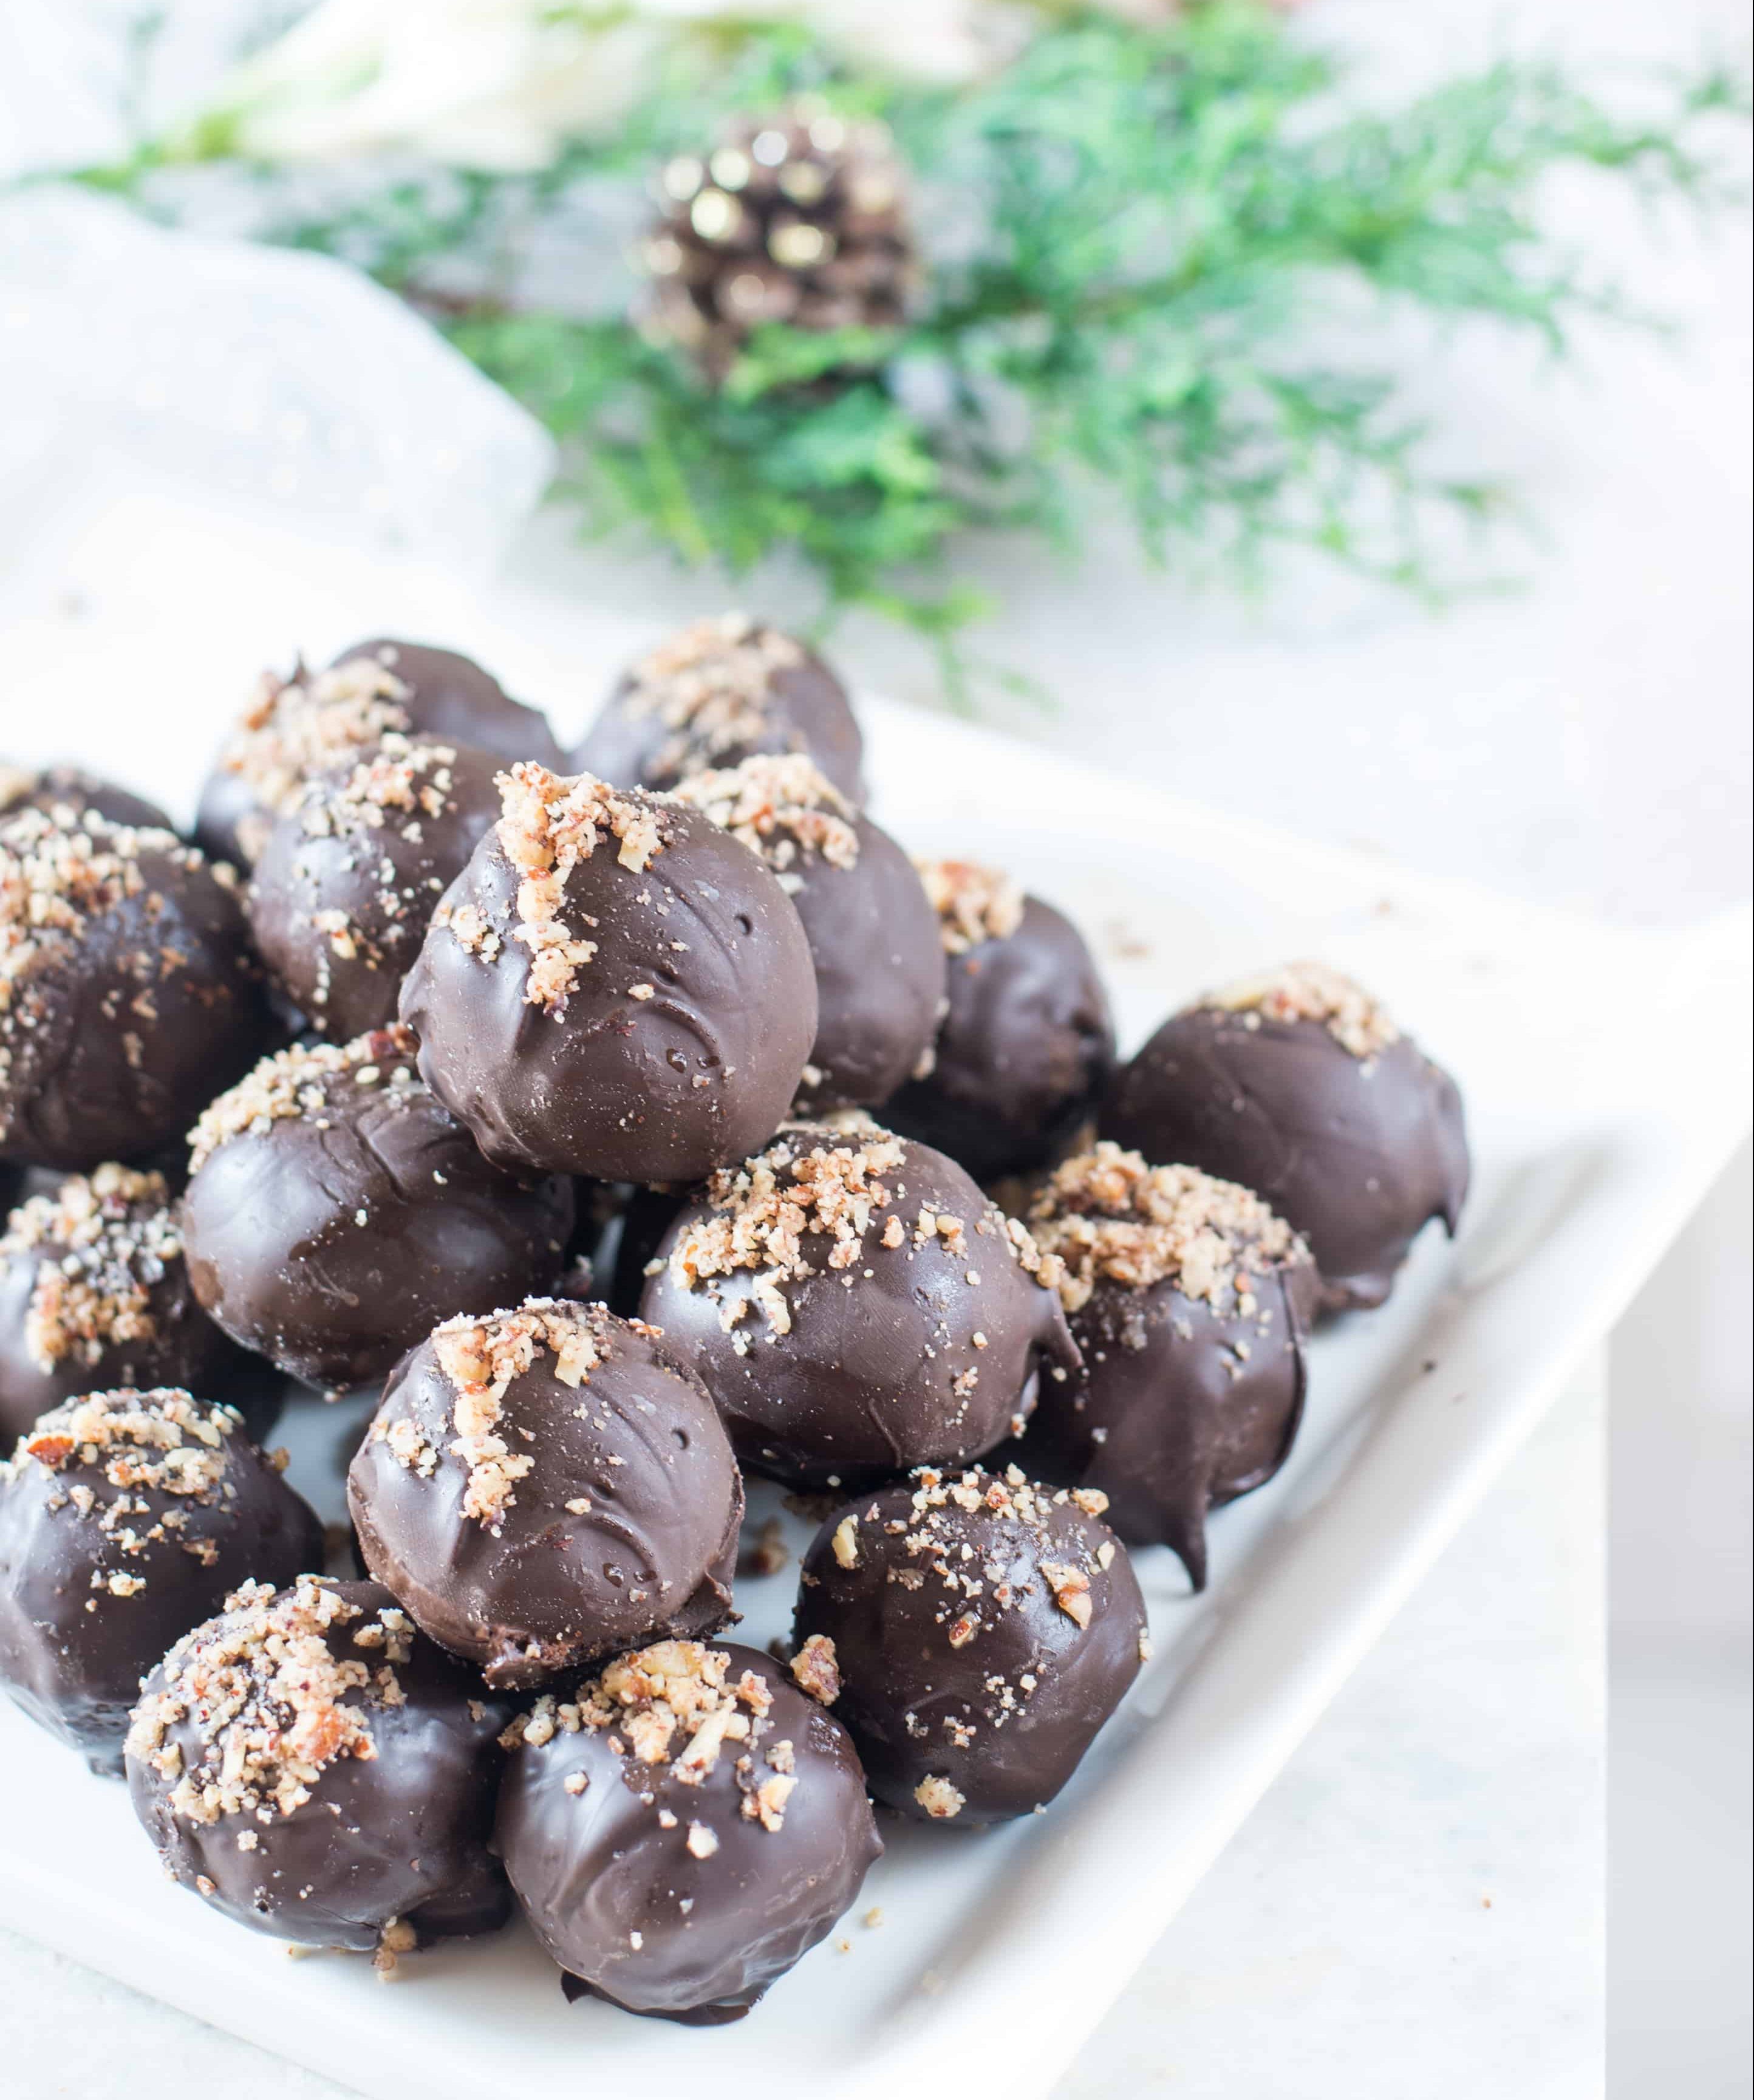 These Chocolate Gingerbread Truffles are made of gingerbread cookies. These truffles are perfect as Christmas gift or on your holiday cookies exchange.